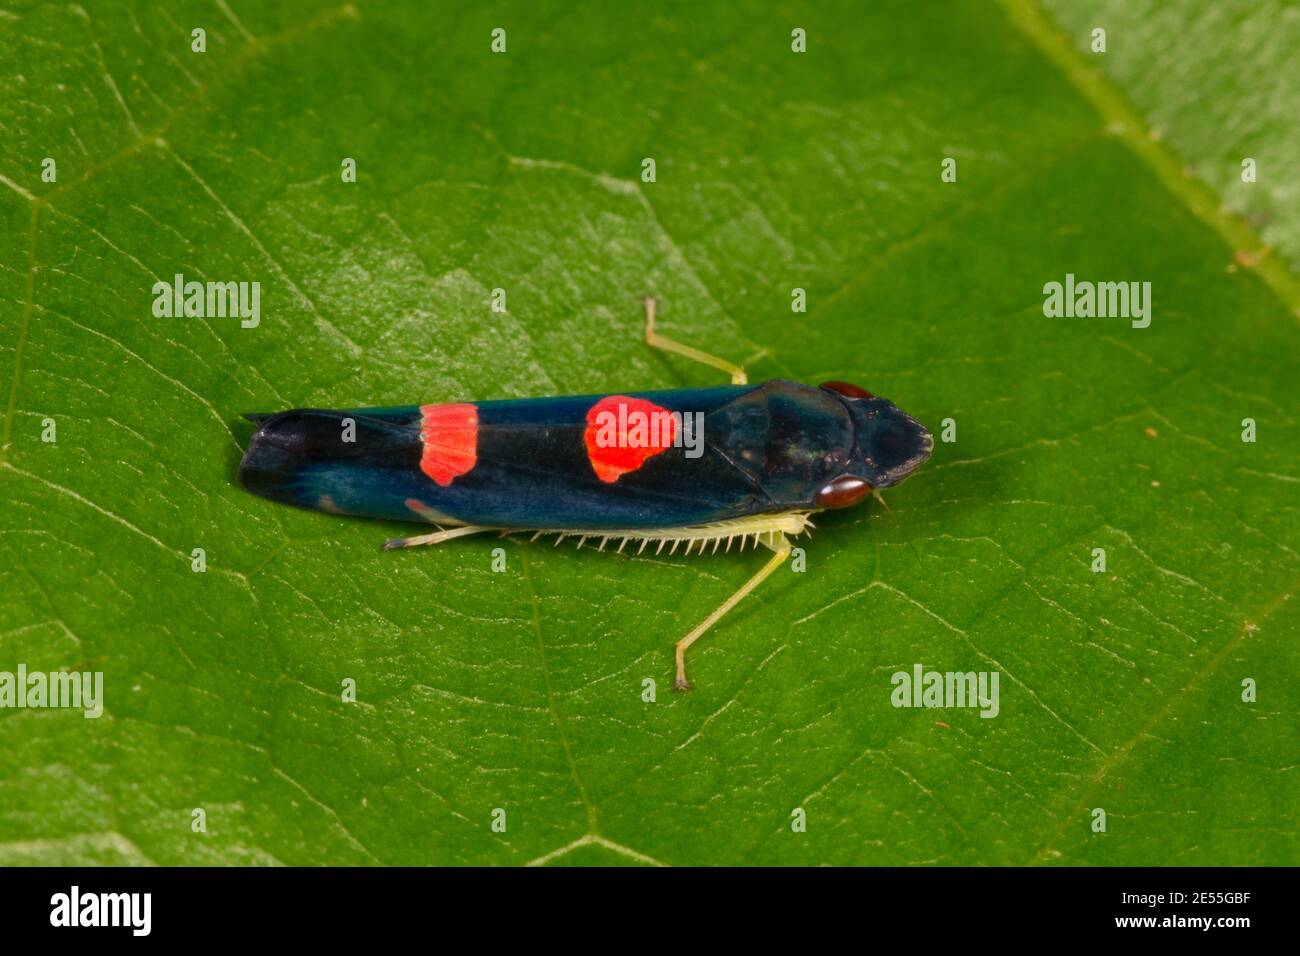 Unidentified Leafhopper, Cicadellidae. Length 10 mm. Stock Photo